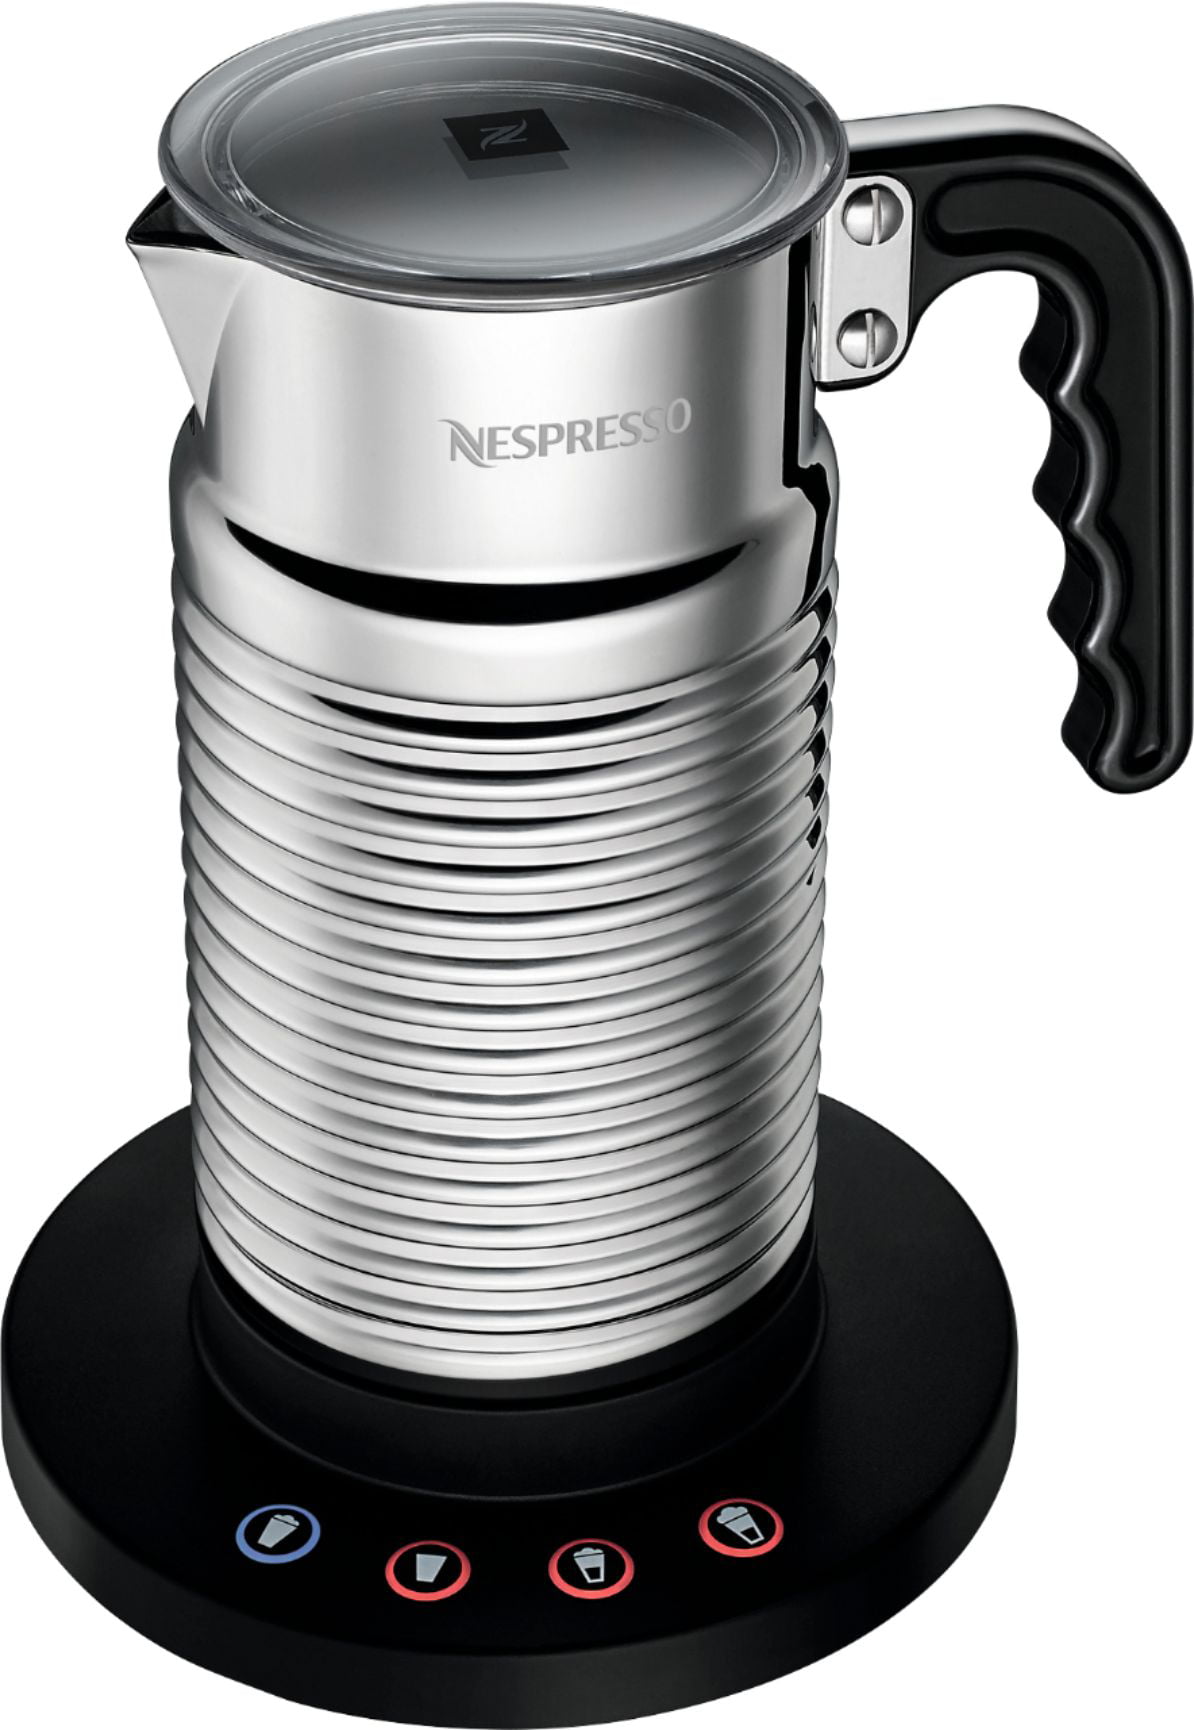 Nespresso Aeroccino Milk Frother Stainless Steel w/Base Heat Froth